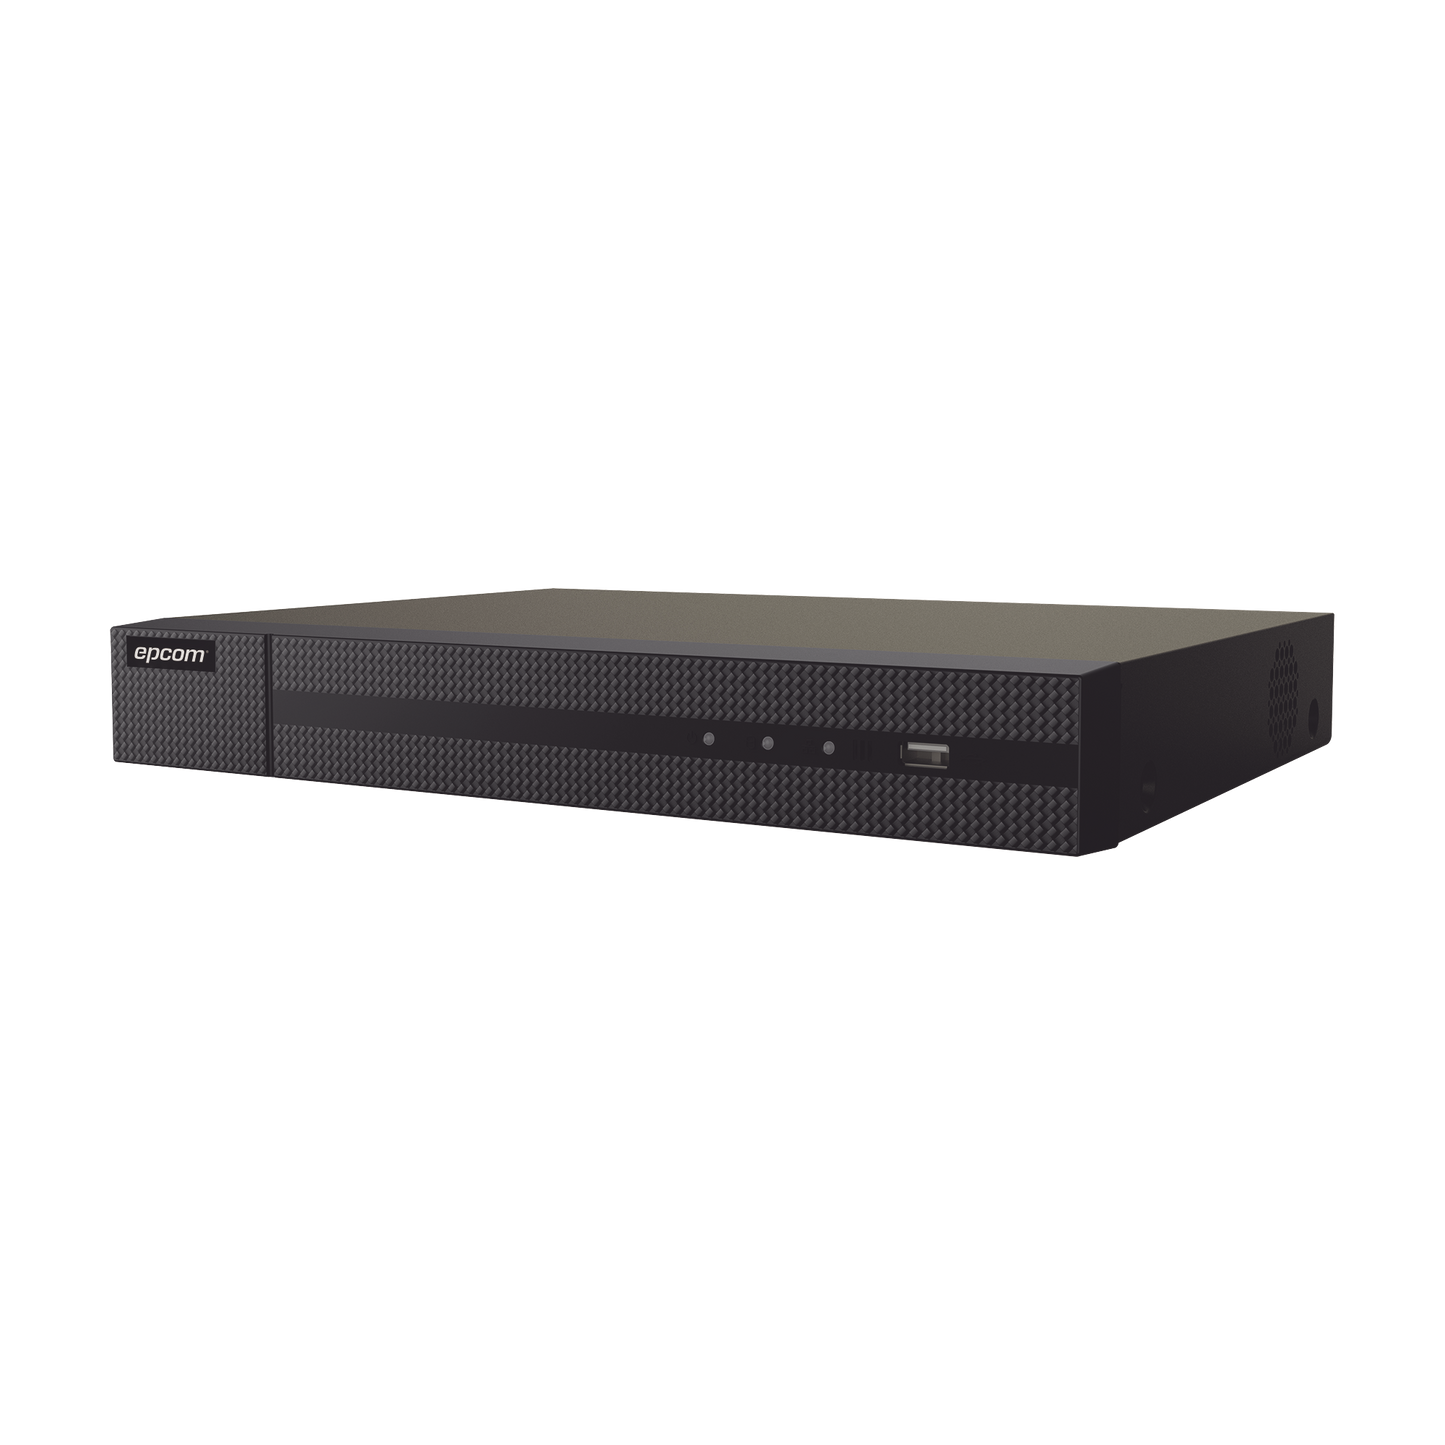 NVR 8MP / 8 IP Channel / 8 PoE+ Ports / 1 HDD / H.265+ / 4K Video Ooutput